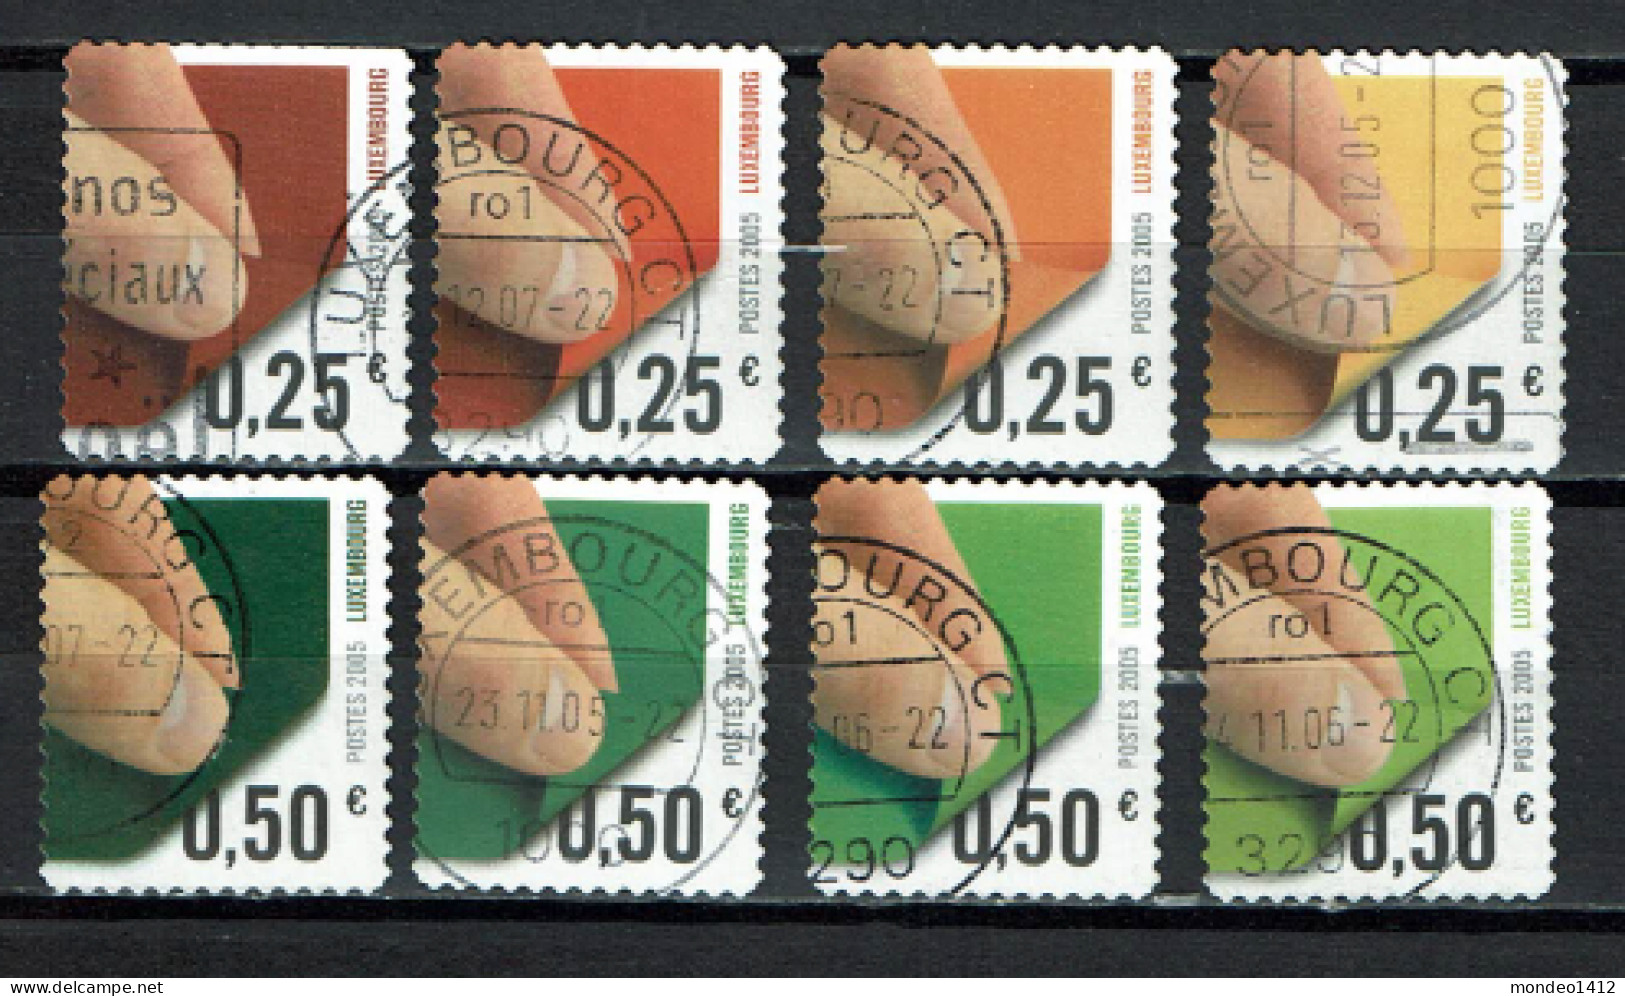 Luxembourg 2005 - YT 1623/1630 - Série Courante, Postocollants - Used Stamps